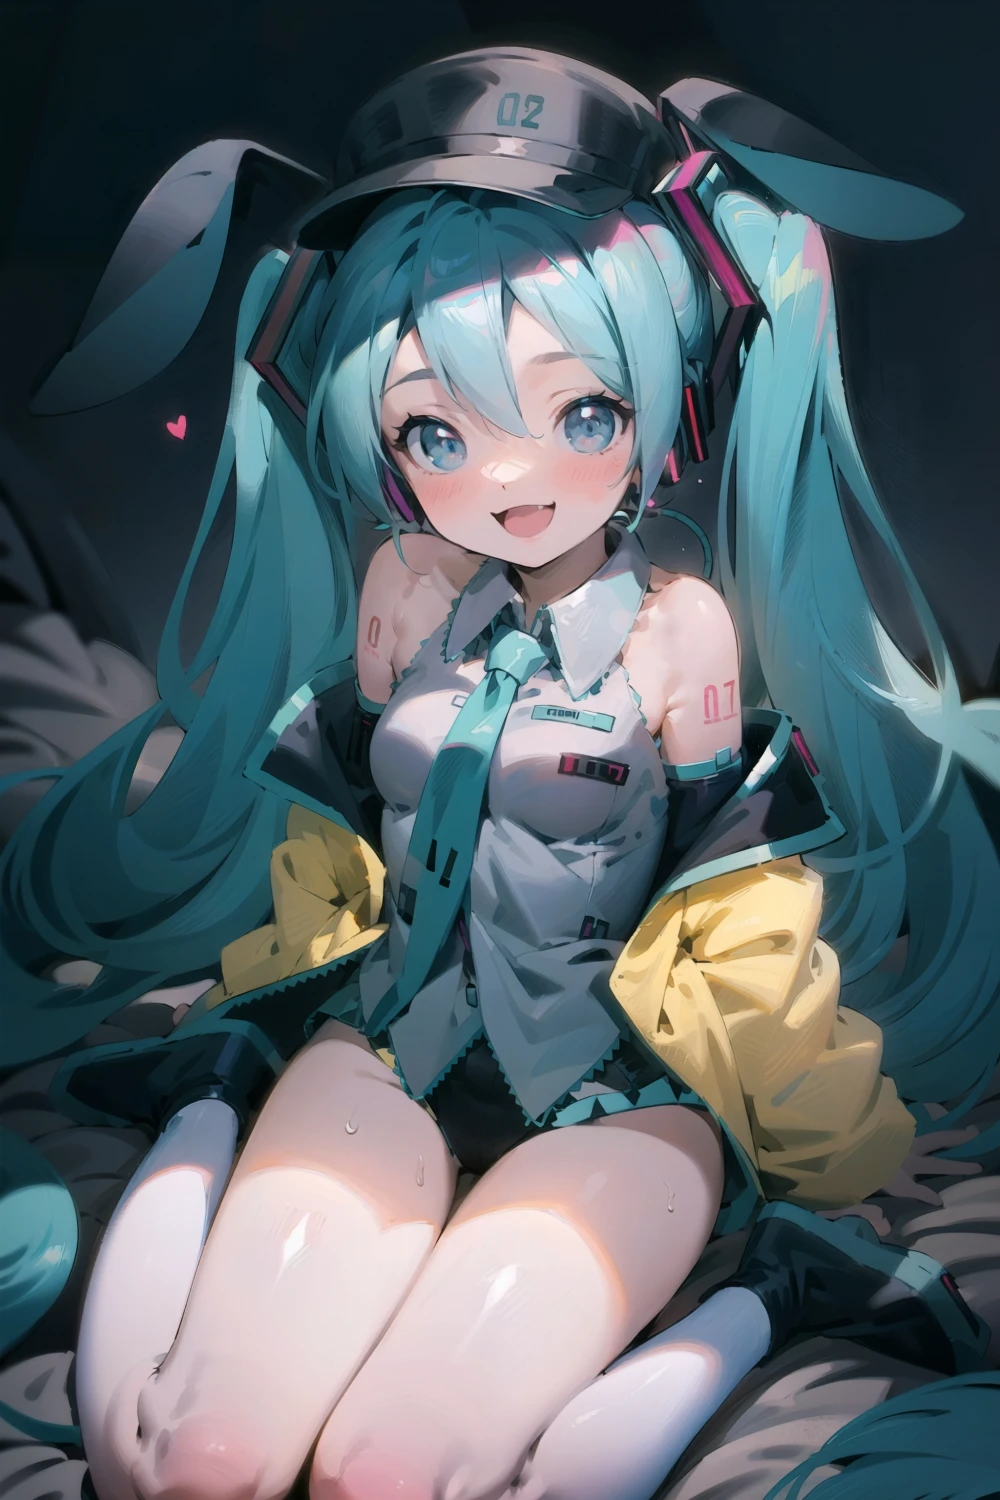 hatsune-miku-anime-style-all-ages-2-41